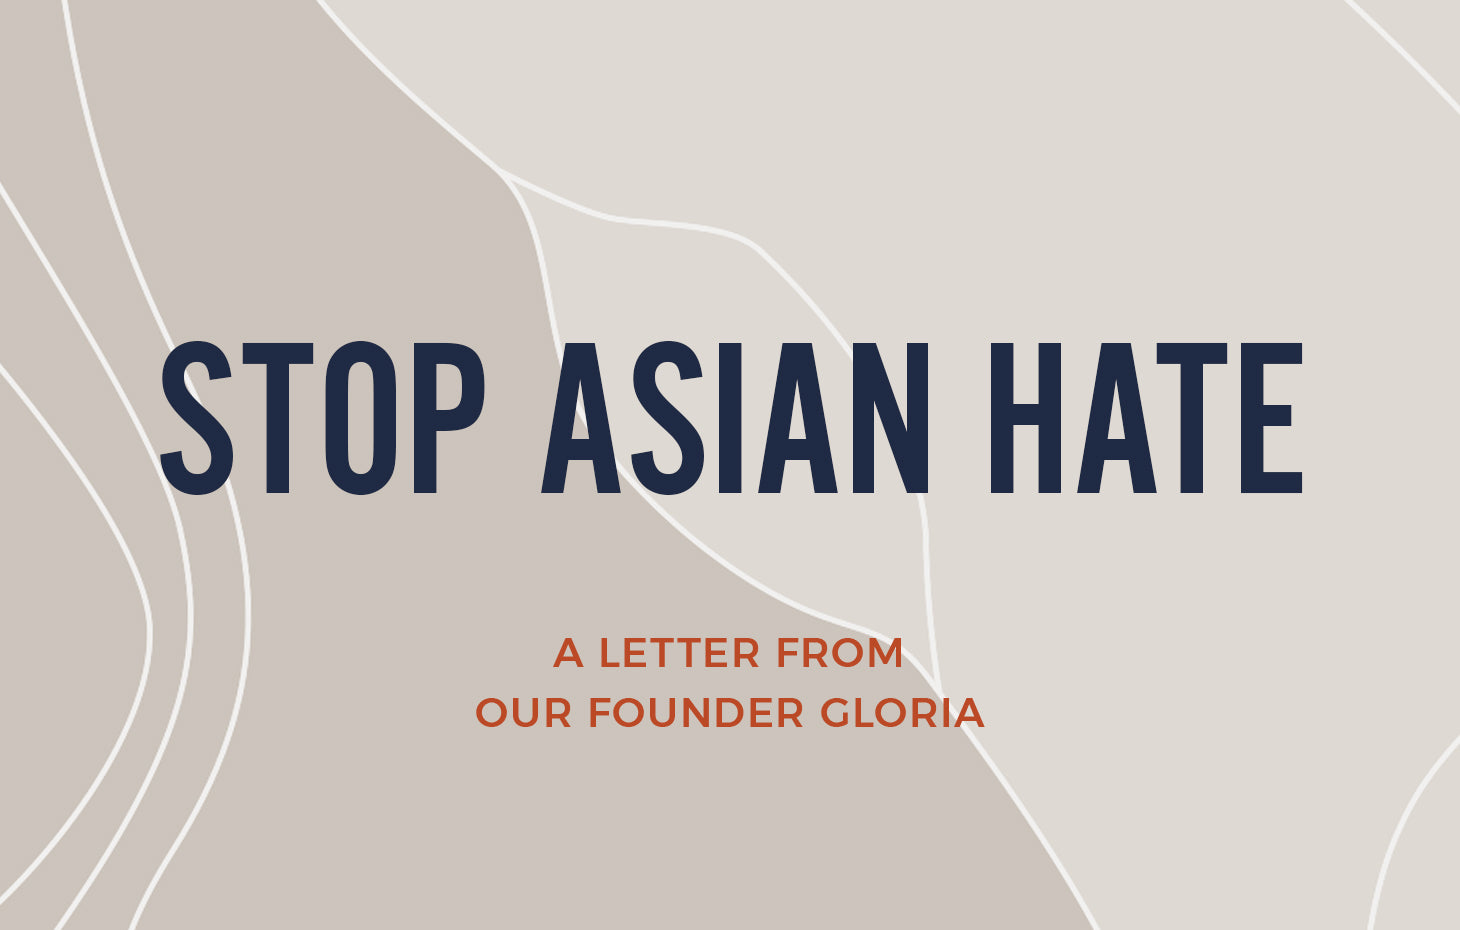 A LETTER FROM OUR FOUNDER ON ANTI-ASIAN RACISM